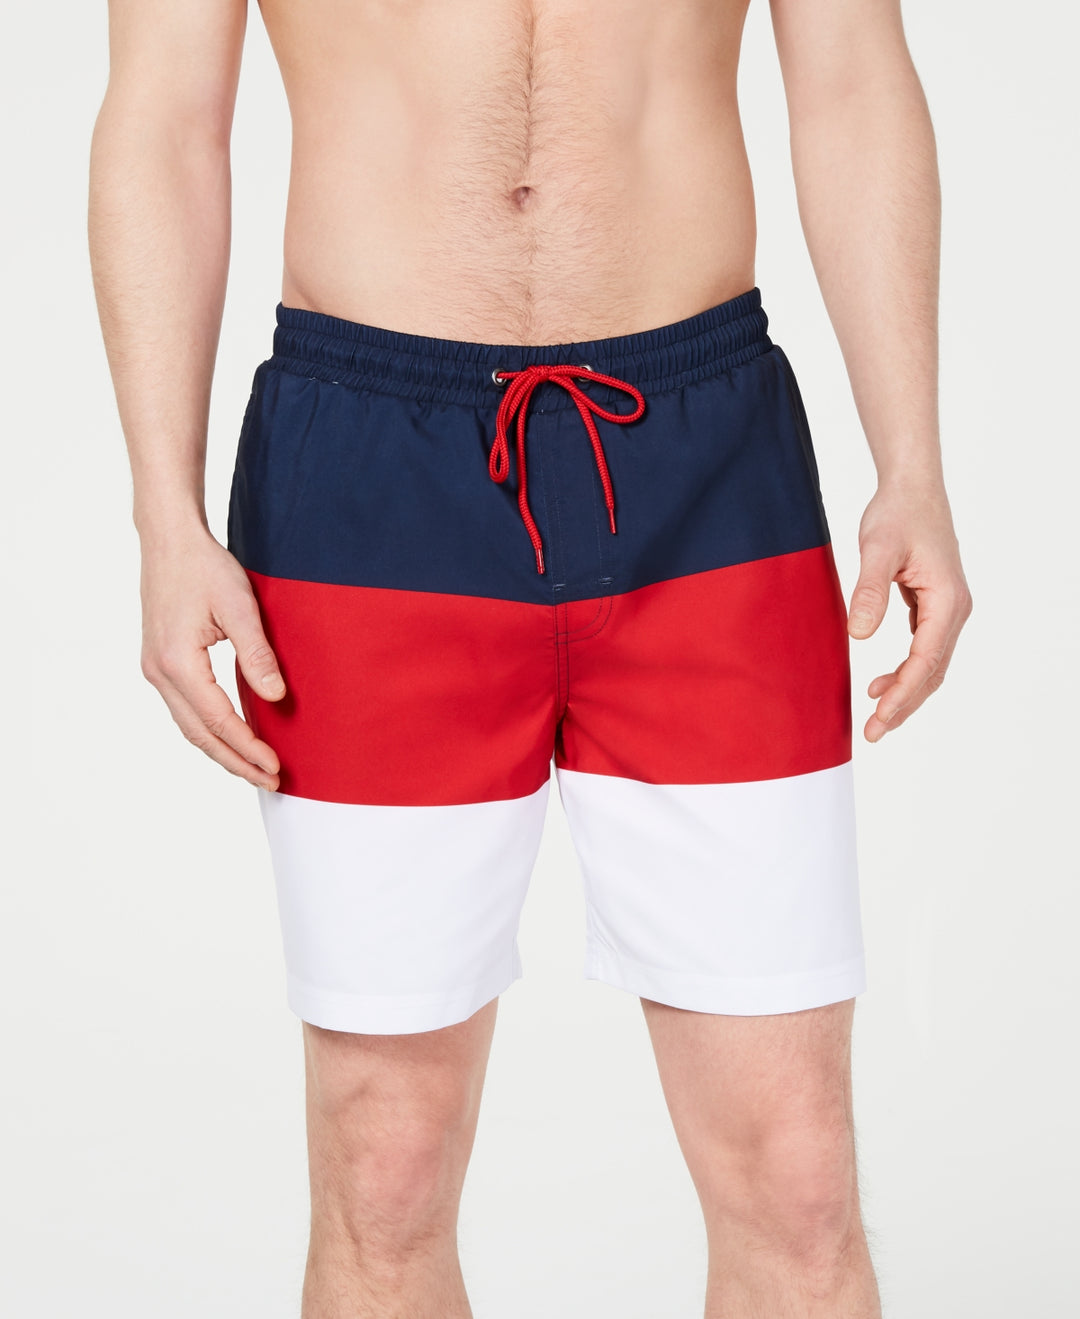 Club Room Men's Colorblocked 7 Swim Trunks Red Size XX-Large